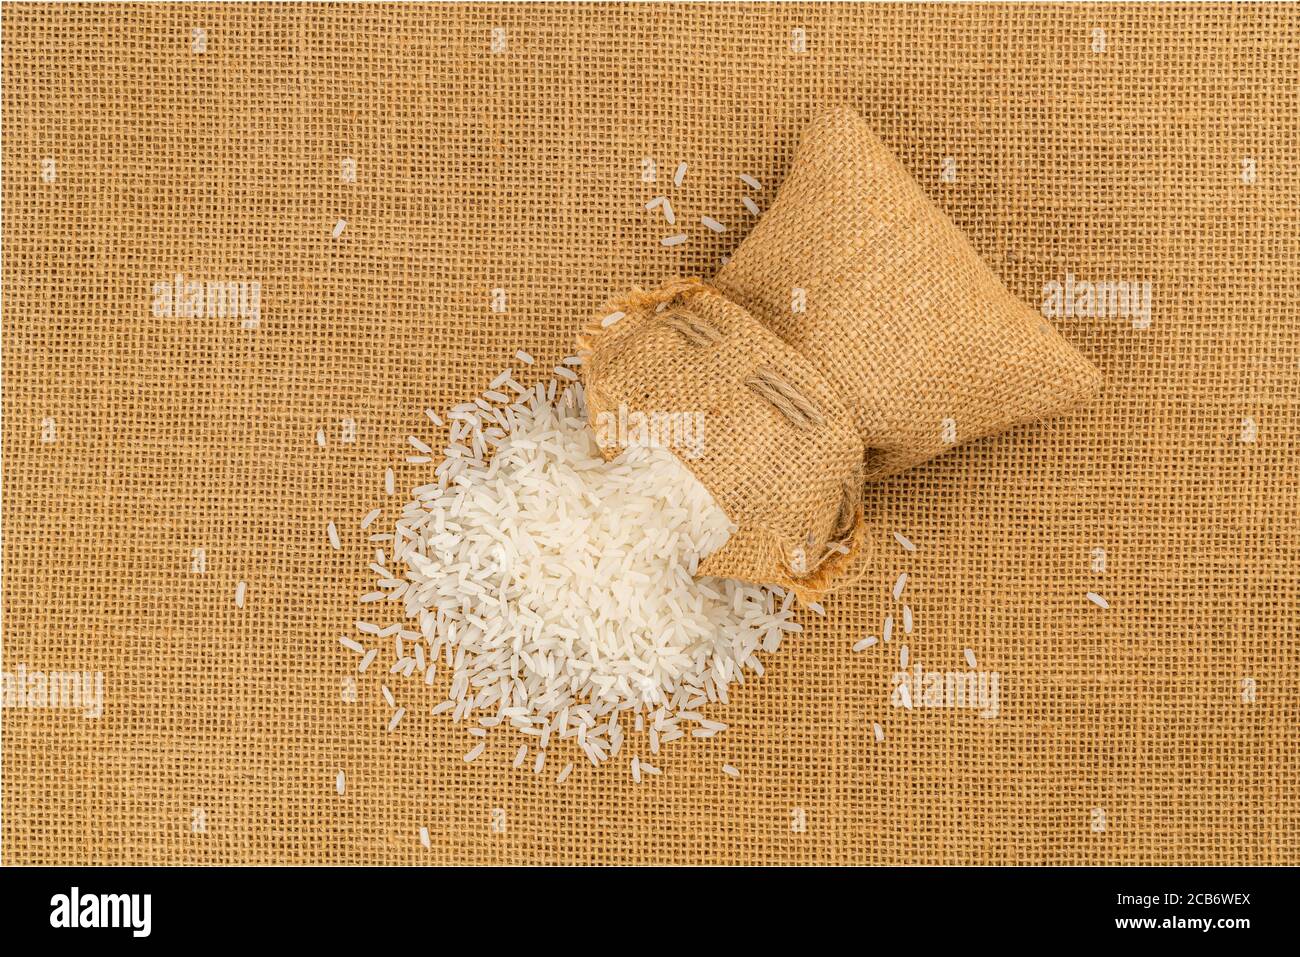 Top view of jasmine rice flow out from a sack on the floor covered with sackcloth. Stock Photo